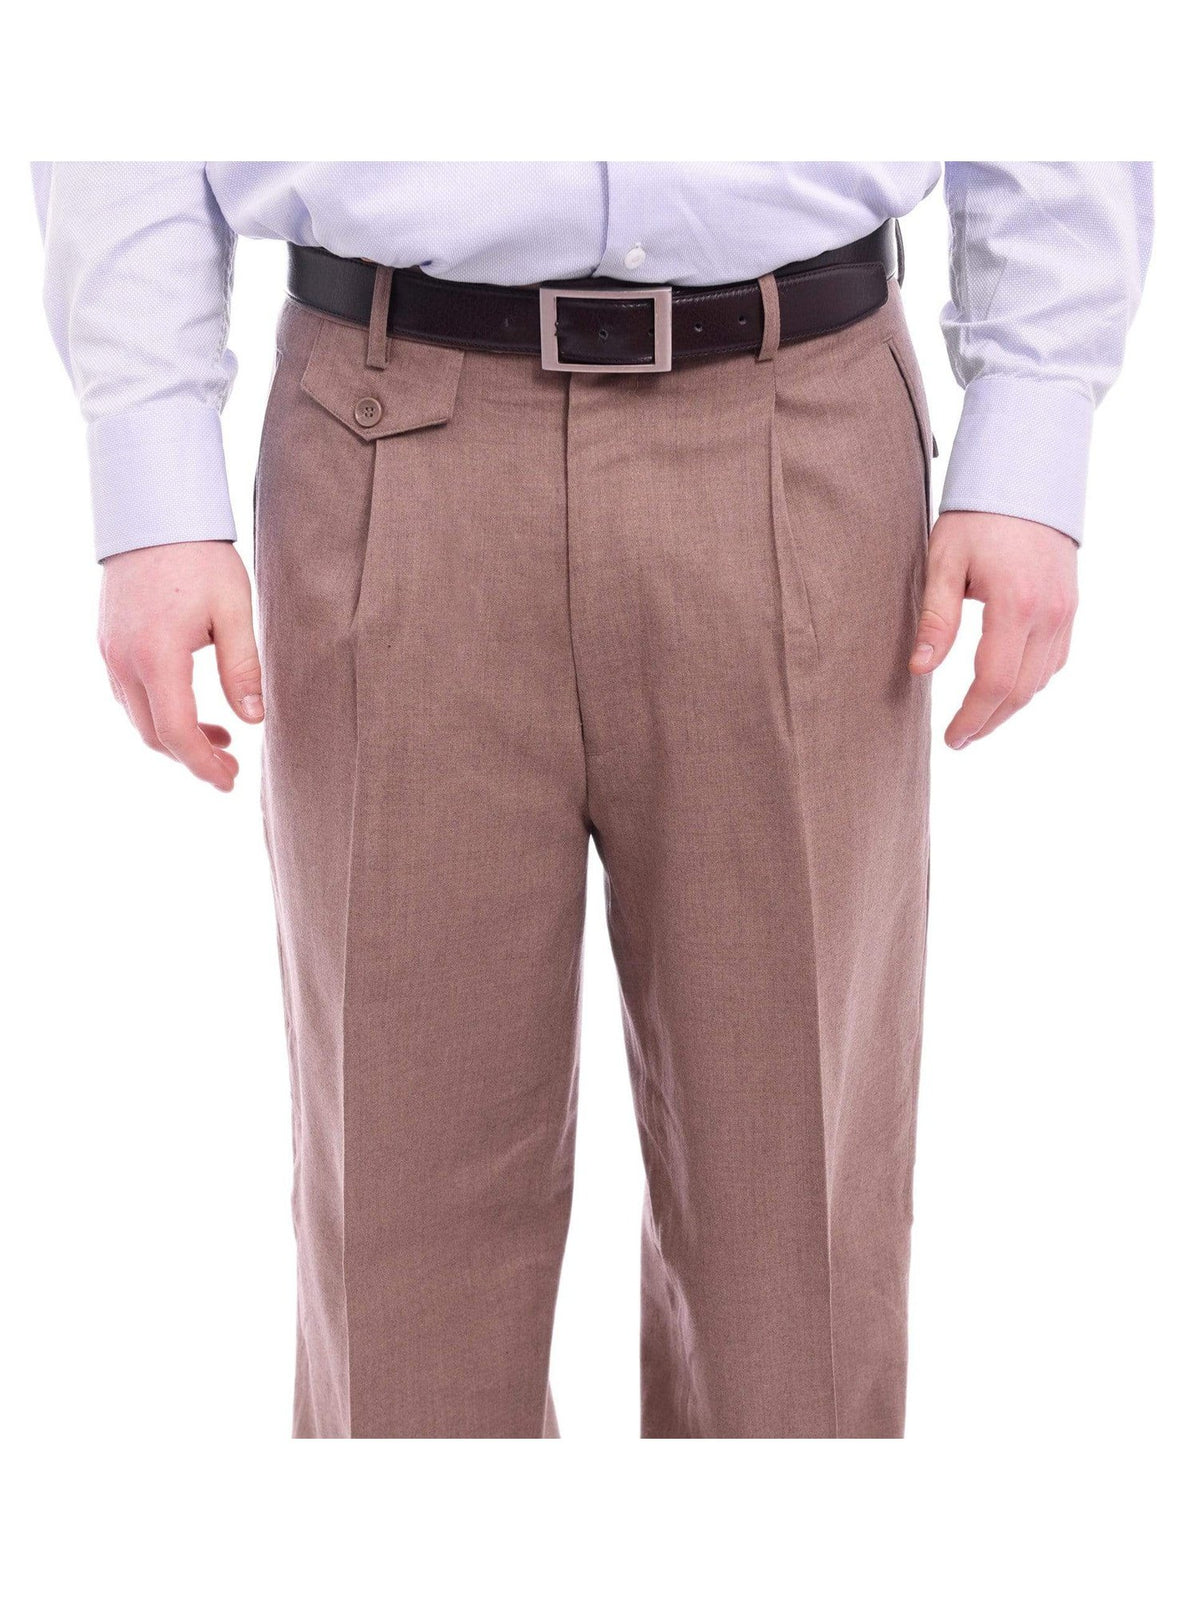 Apollo King PANTS Apollo King Classic Fit Solid Taupe Single Pleated Wide Leg Wool Dress Pants